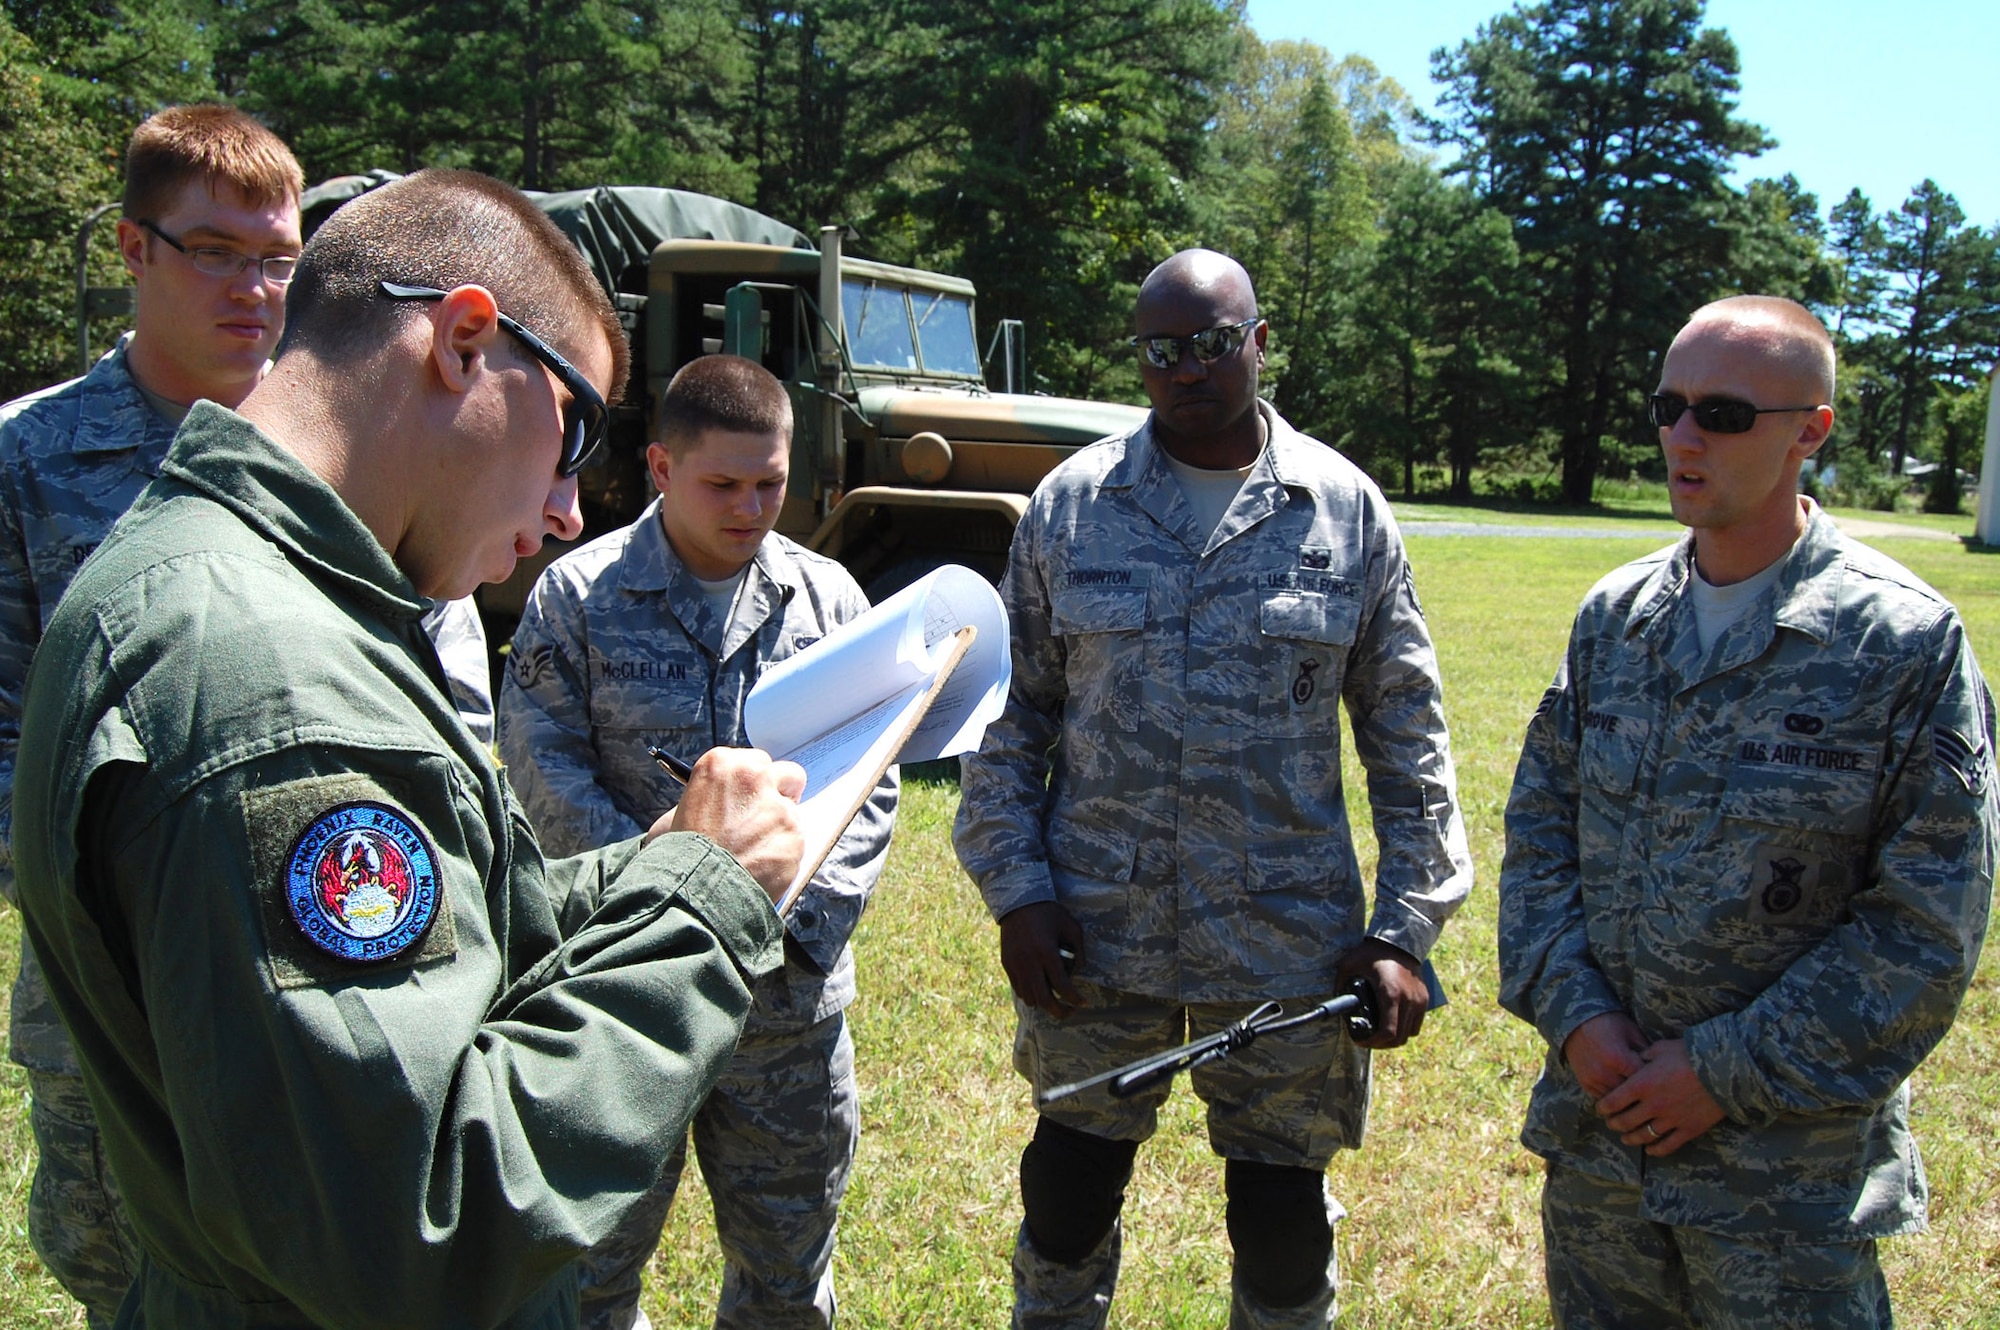 Staff Sgt. James Chubb, an instructor in the U.S. Air Force Expeditionary Center's Phoenix Raven Training Course, provides feedback to students during an evaluation session for the Raven course on a Fort Dix, N.J., range Aug. 20, 2008.  Raven training is taught by the Center's 421st Combat Training Squadron at Fort Dix.  It gives security forces Airmen specialized training in aircraft security, verbal judo and self defense.  (U.S. Air Force Photo/Tech. Sgt. Scott T. Sturkol)